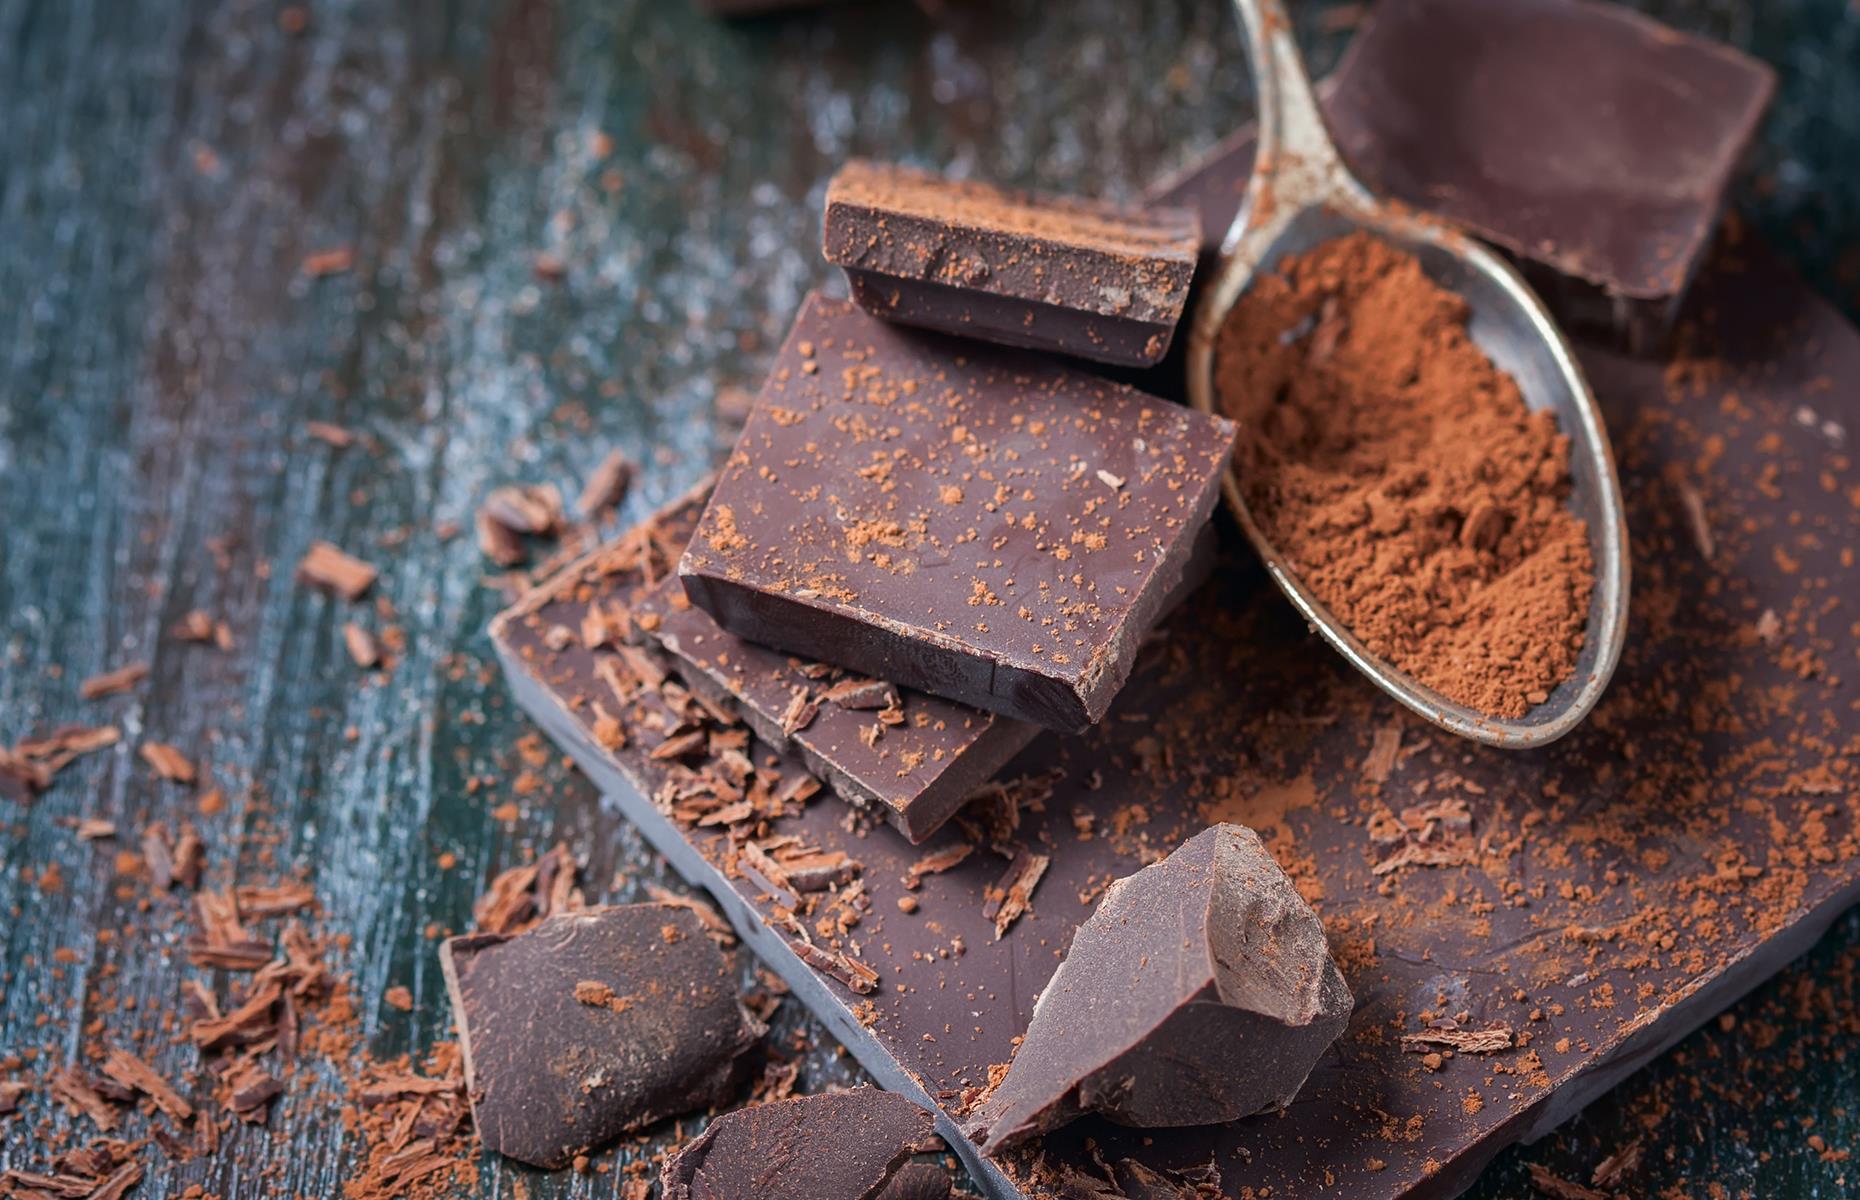 <p>It's hard to imagine life without chocolate and, as it turns out, <a href="https://www.smithsonianmag.com/history/archaeology-chocolate-180954243/">its history stretches back for many millennia</a>. The beloved food stuff is thought to have roots in Mesoamerican civilisation, and the Olmecs in southern Mexico may have used cacao beans to create ceremonial chocolate drinks as early as 1,500 BC. The Mayans and Aztecs also indulged in and celebrated chocolate, and even used it as a form of currency. Today's chocolate and cocoa industry is worth more than $40 billion (£29.6 billion).</p>